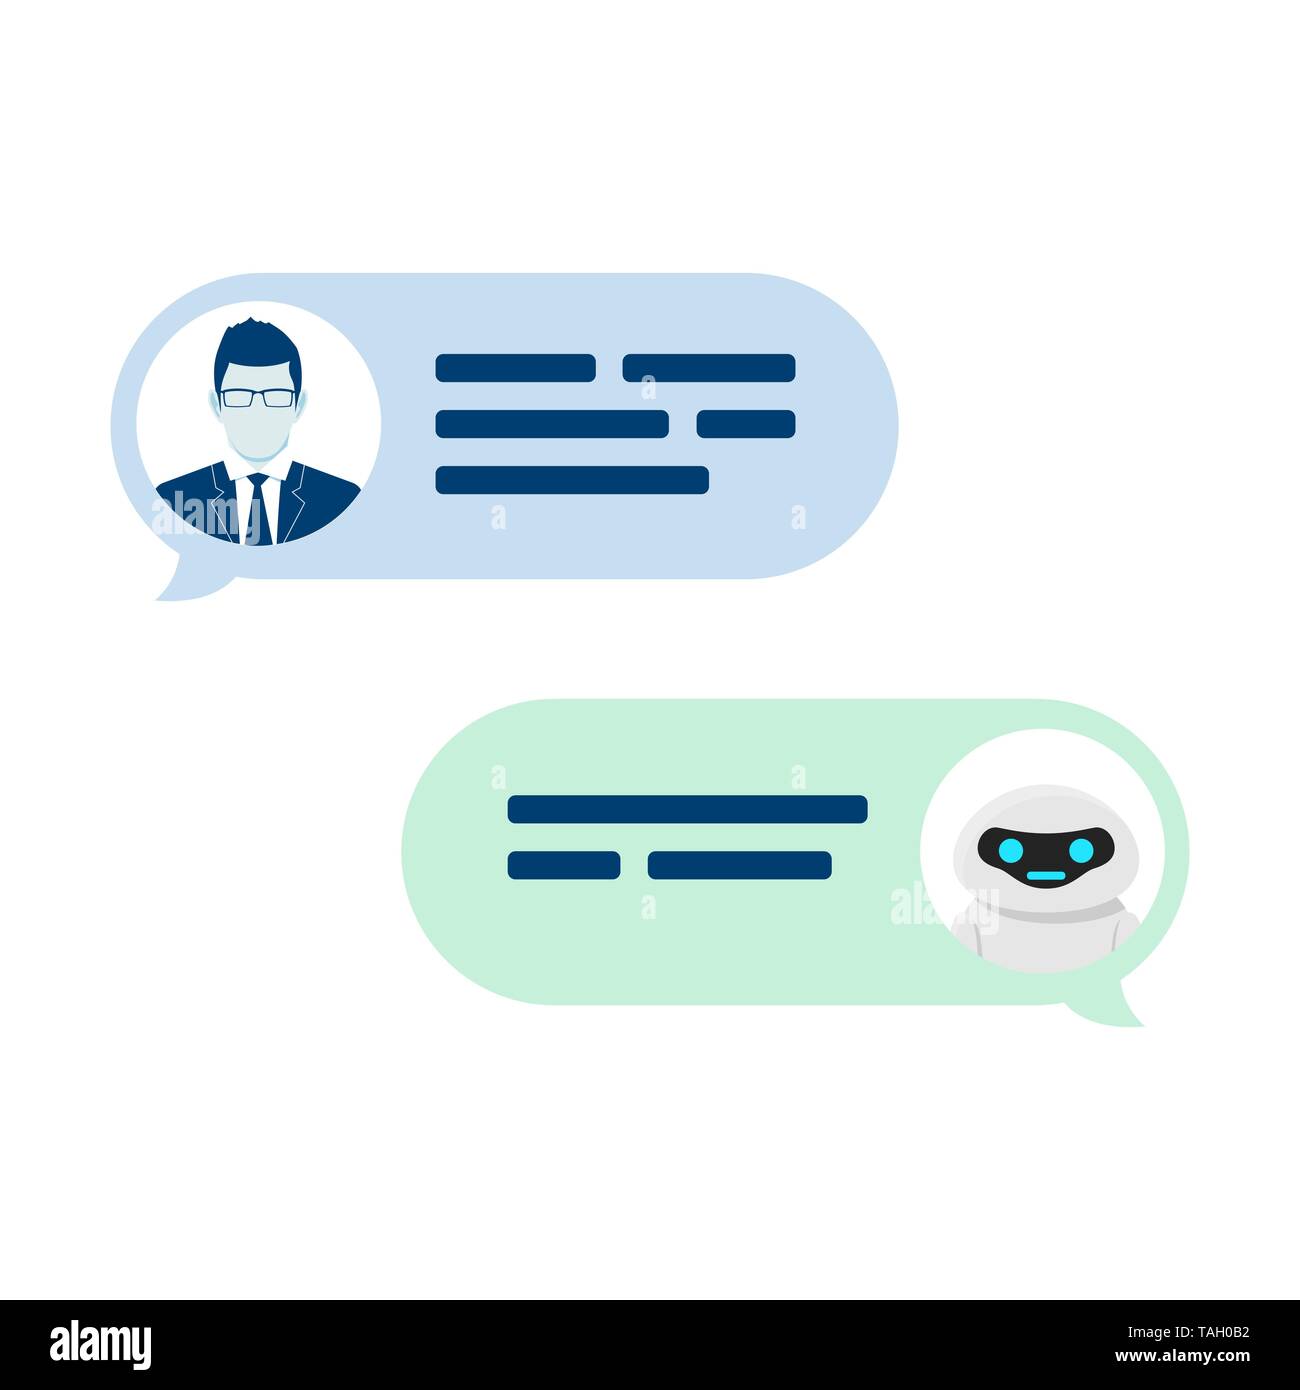 Chatbot robot concept. Dialog help service. User ask question and bot give answer. Vector illustration isolated on white background Stock Vector